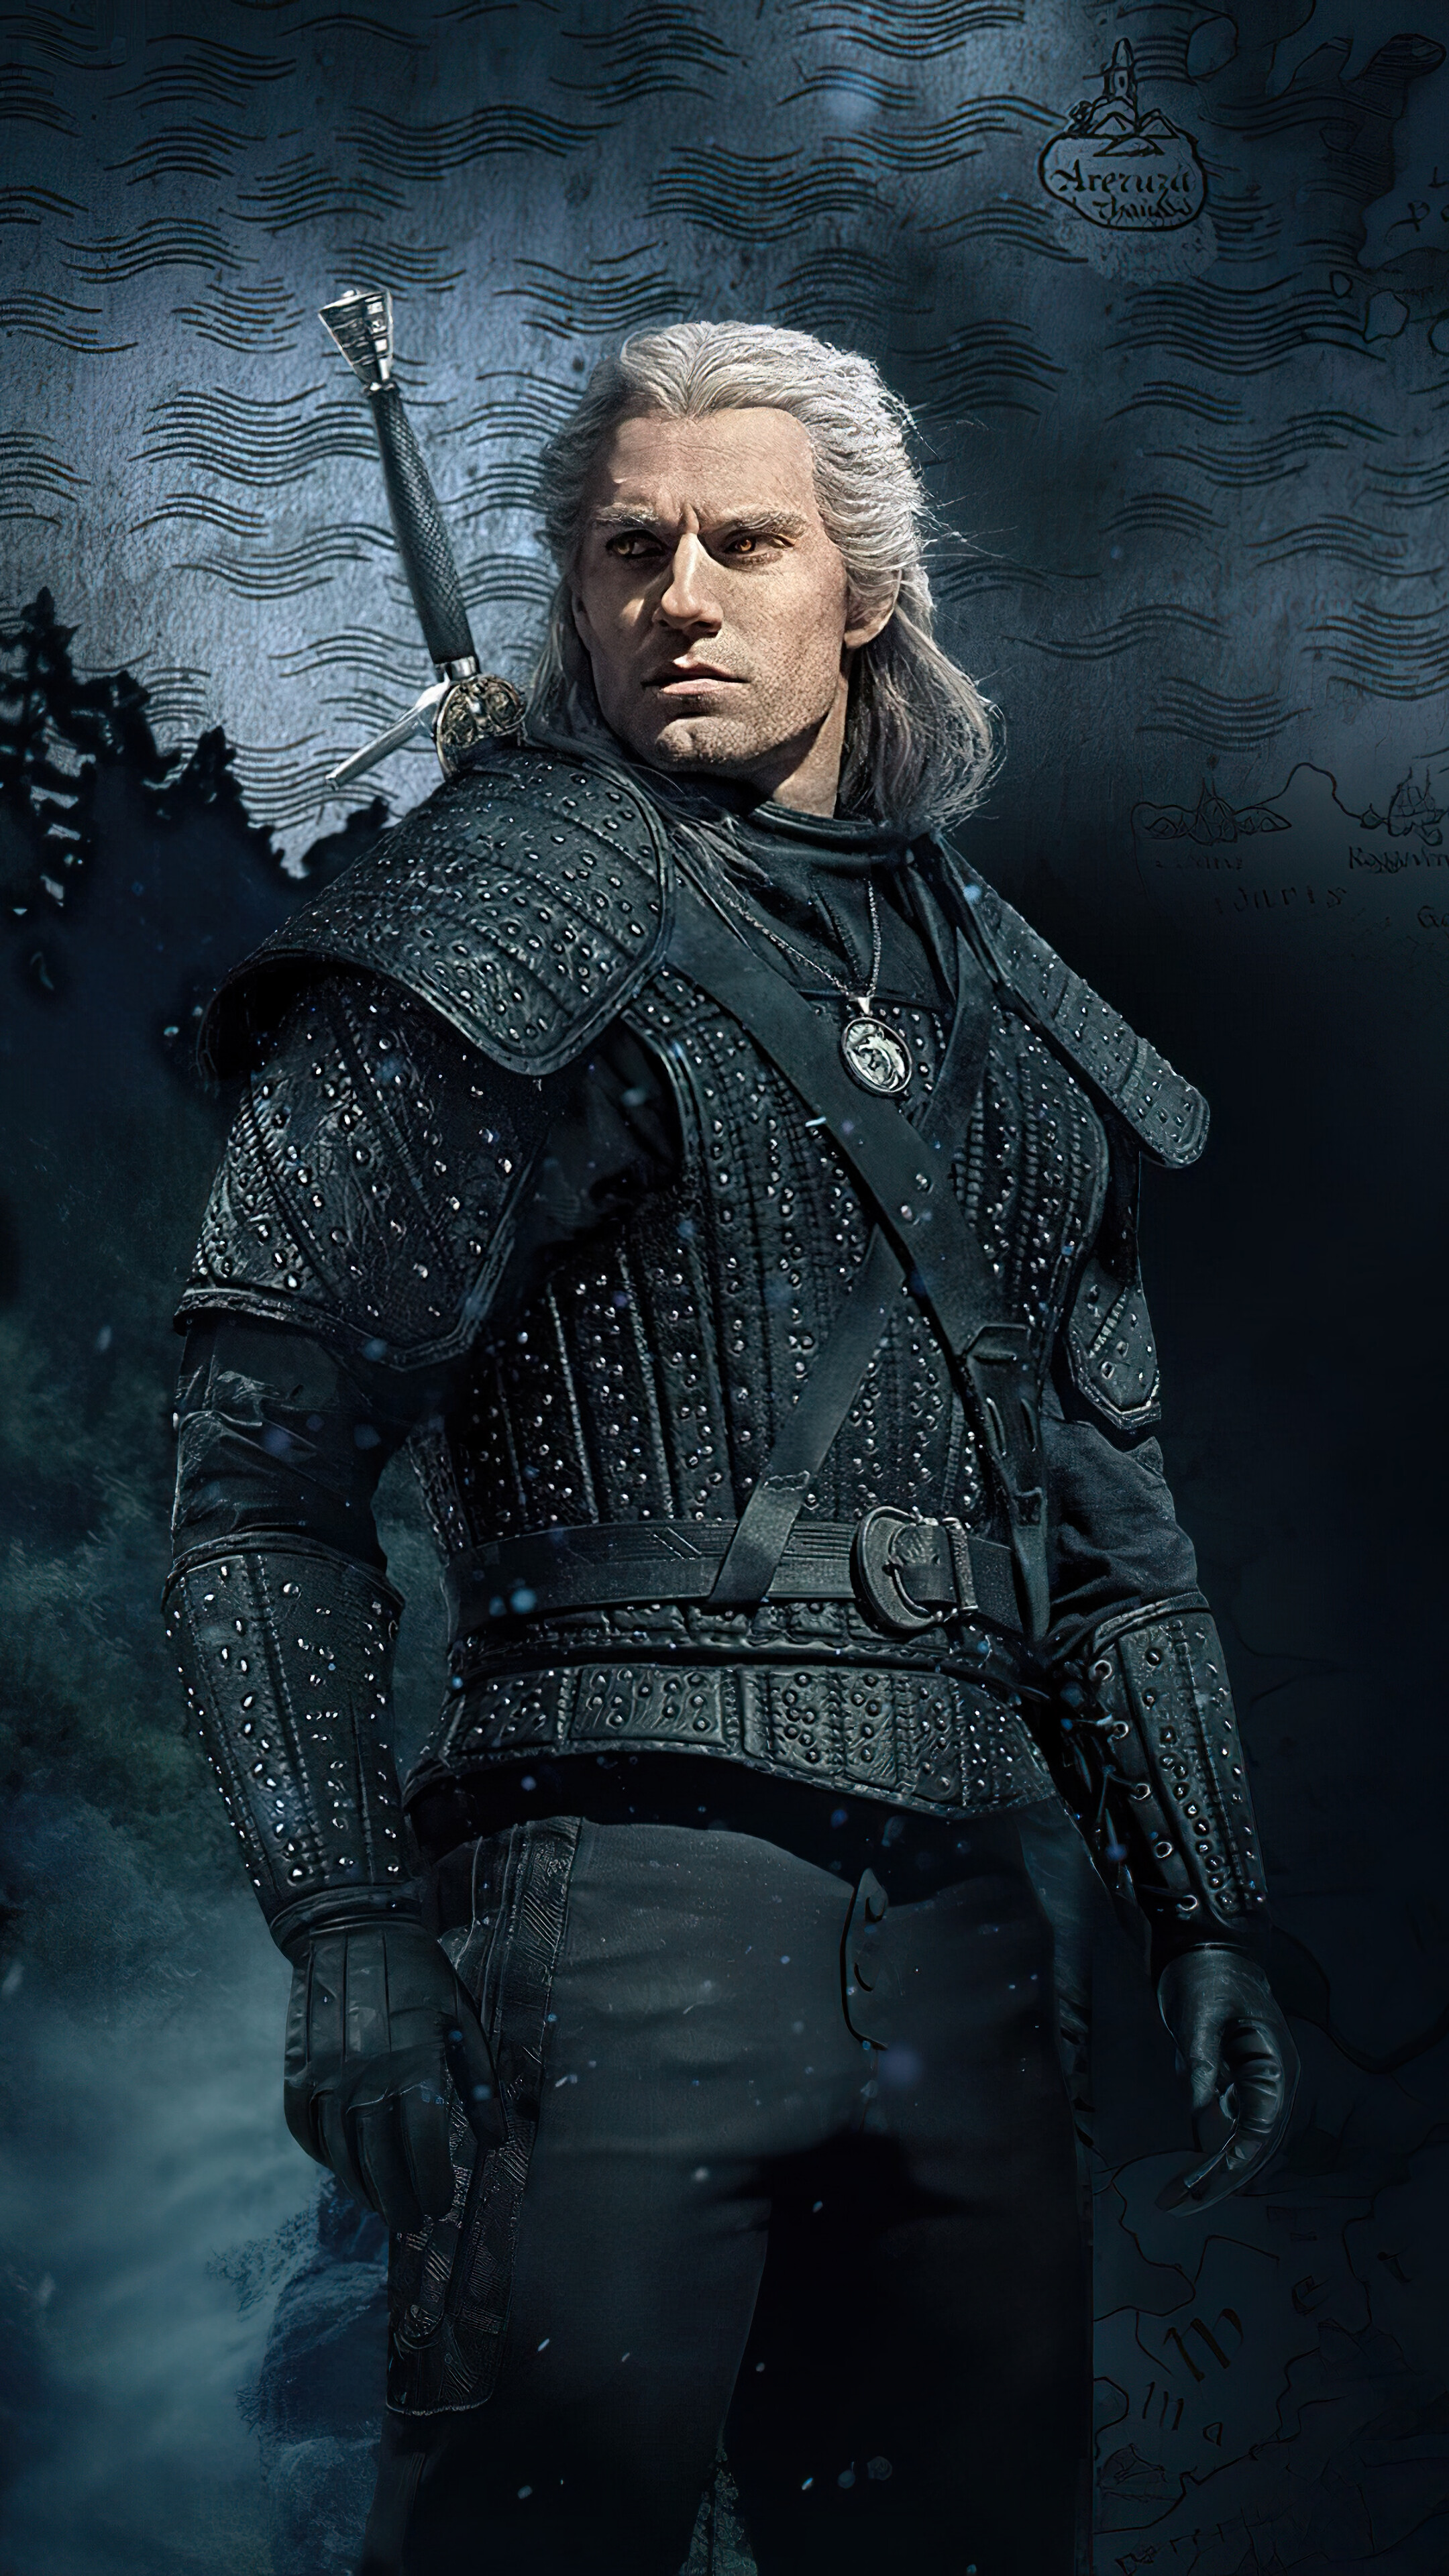 The Witcher Netflix 4K 8K Wallpapers